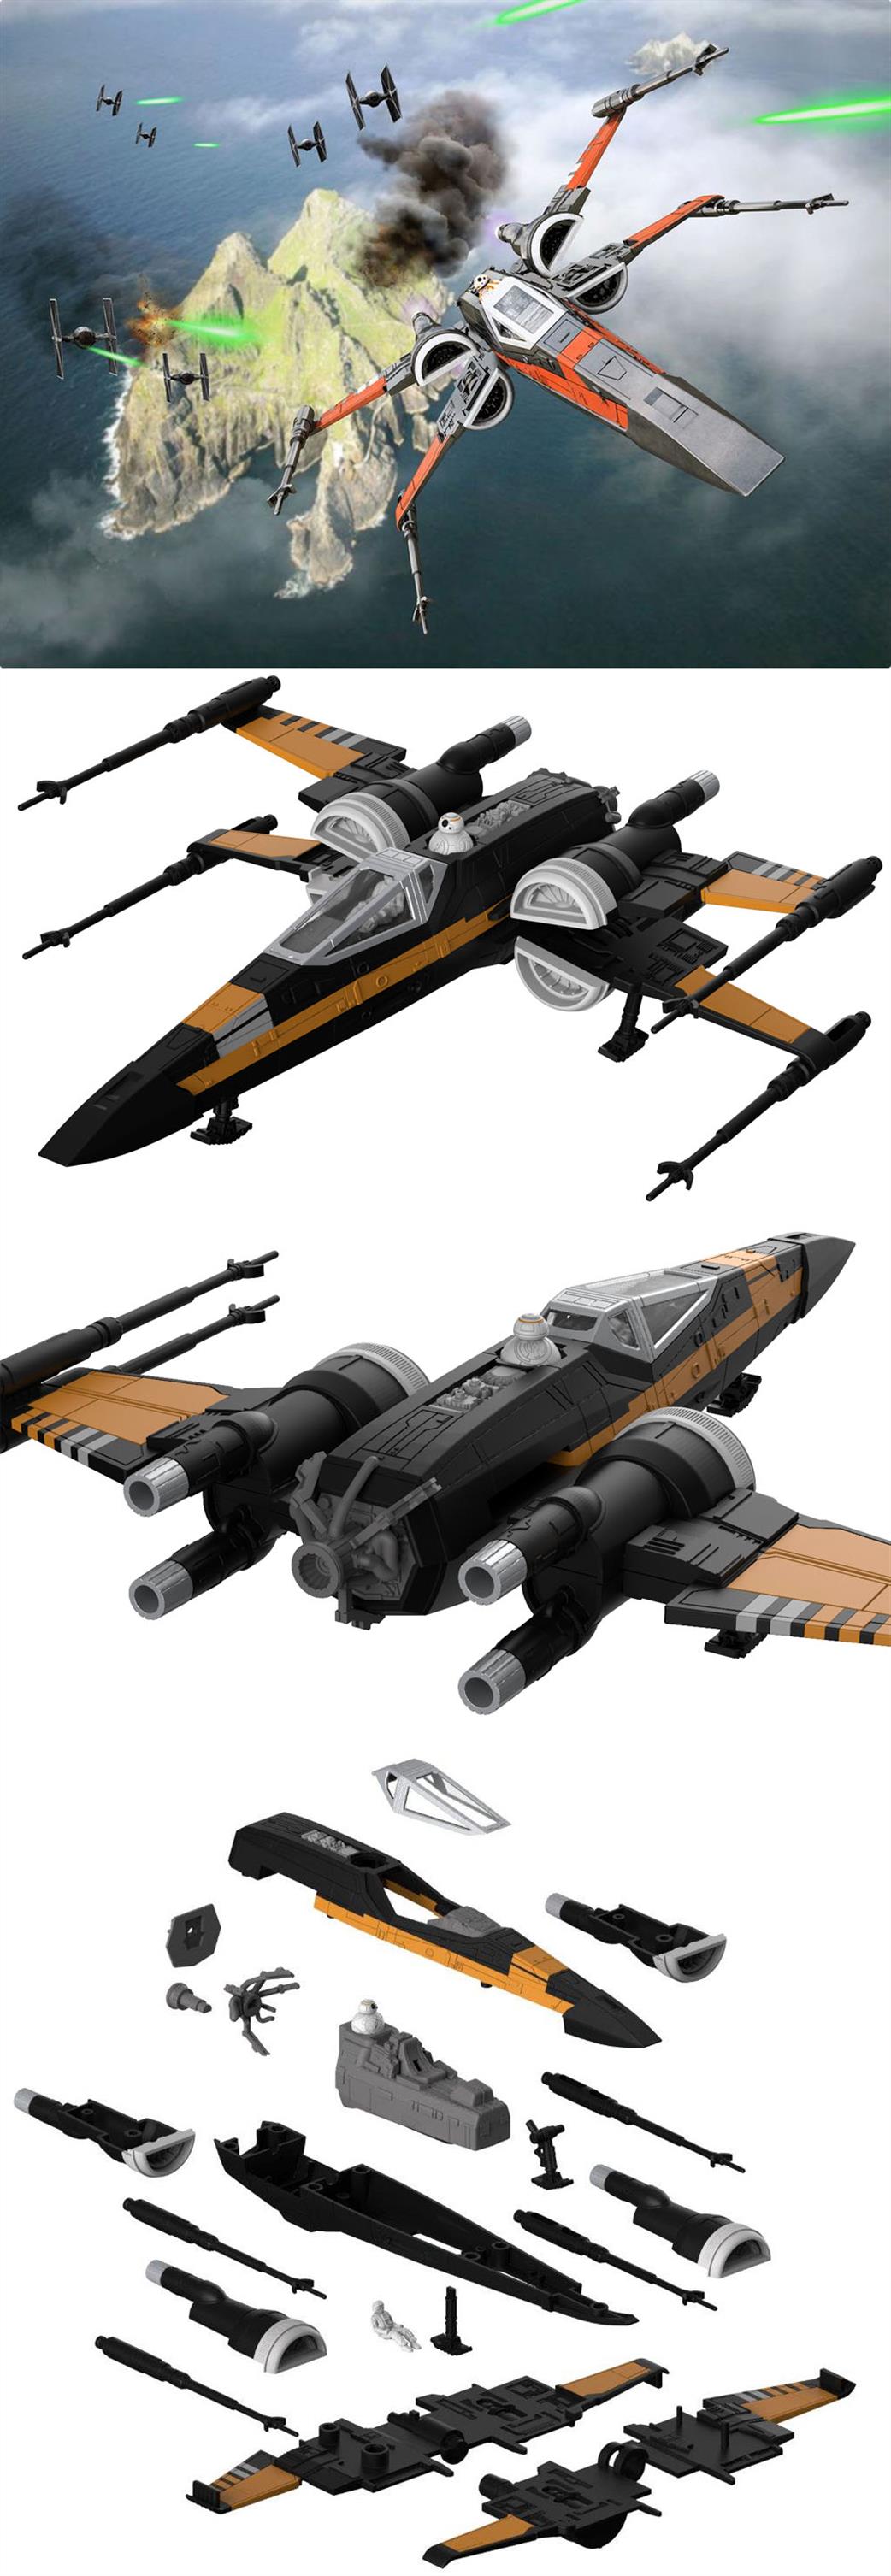 Revell 1/78 06763 Poe's Boosted X-Wing Fighter from Star Wars Episode 8